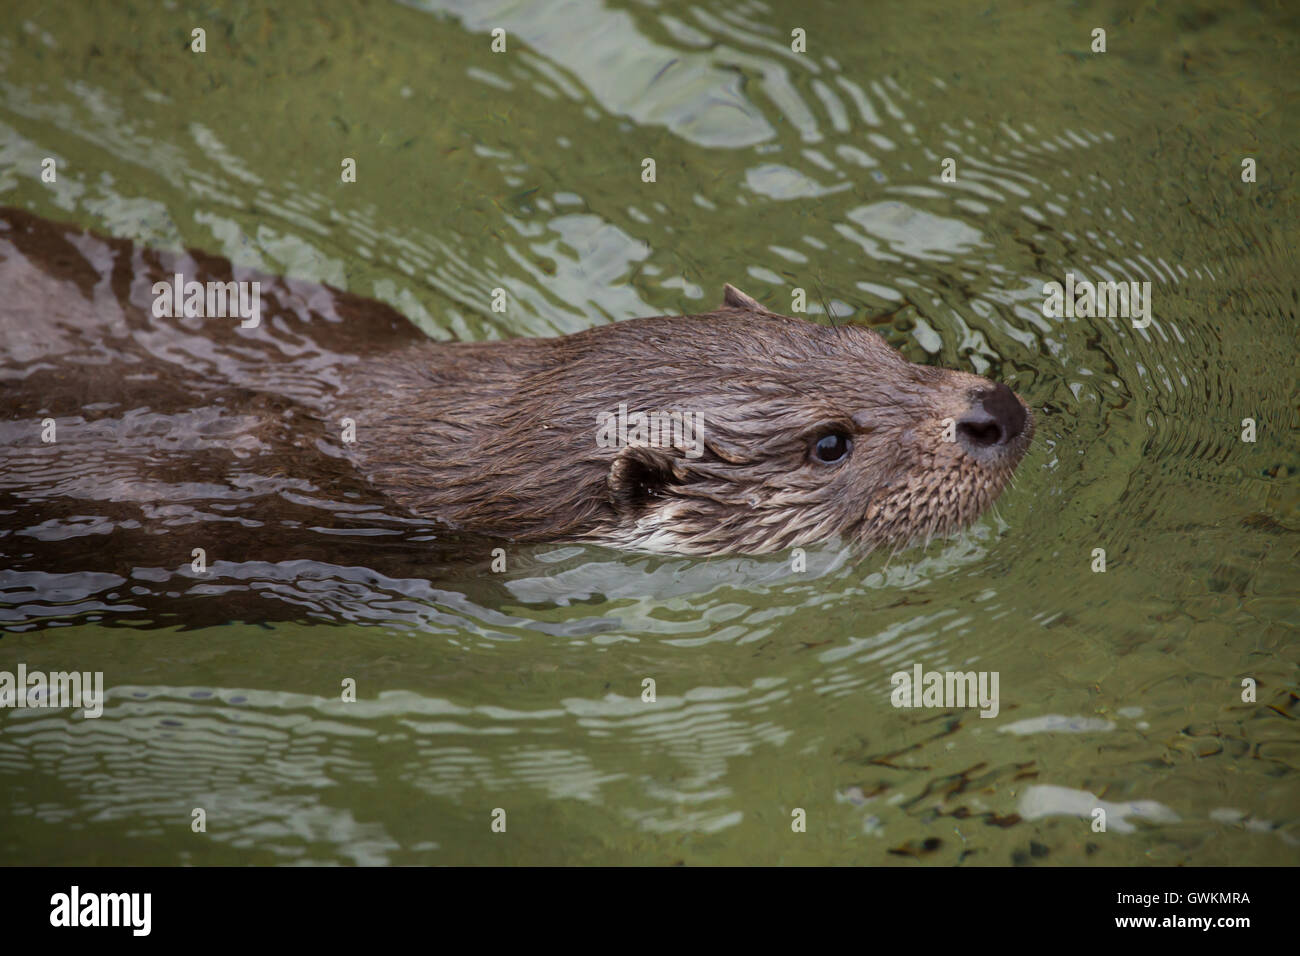 Eurasian otter (Lutra lutra lutra), also known as the common otter. Wildlife animal. Stock Photo